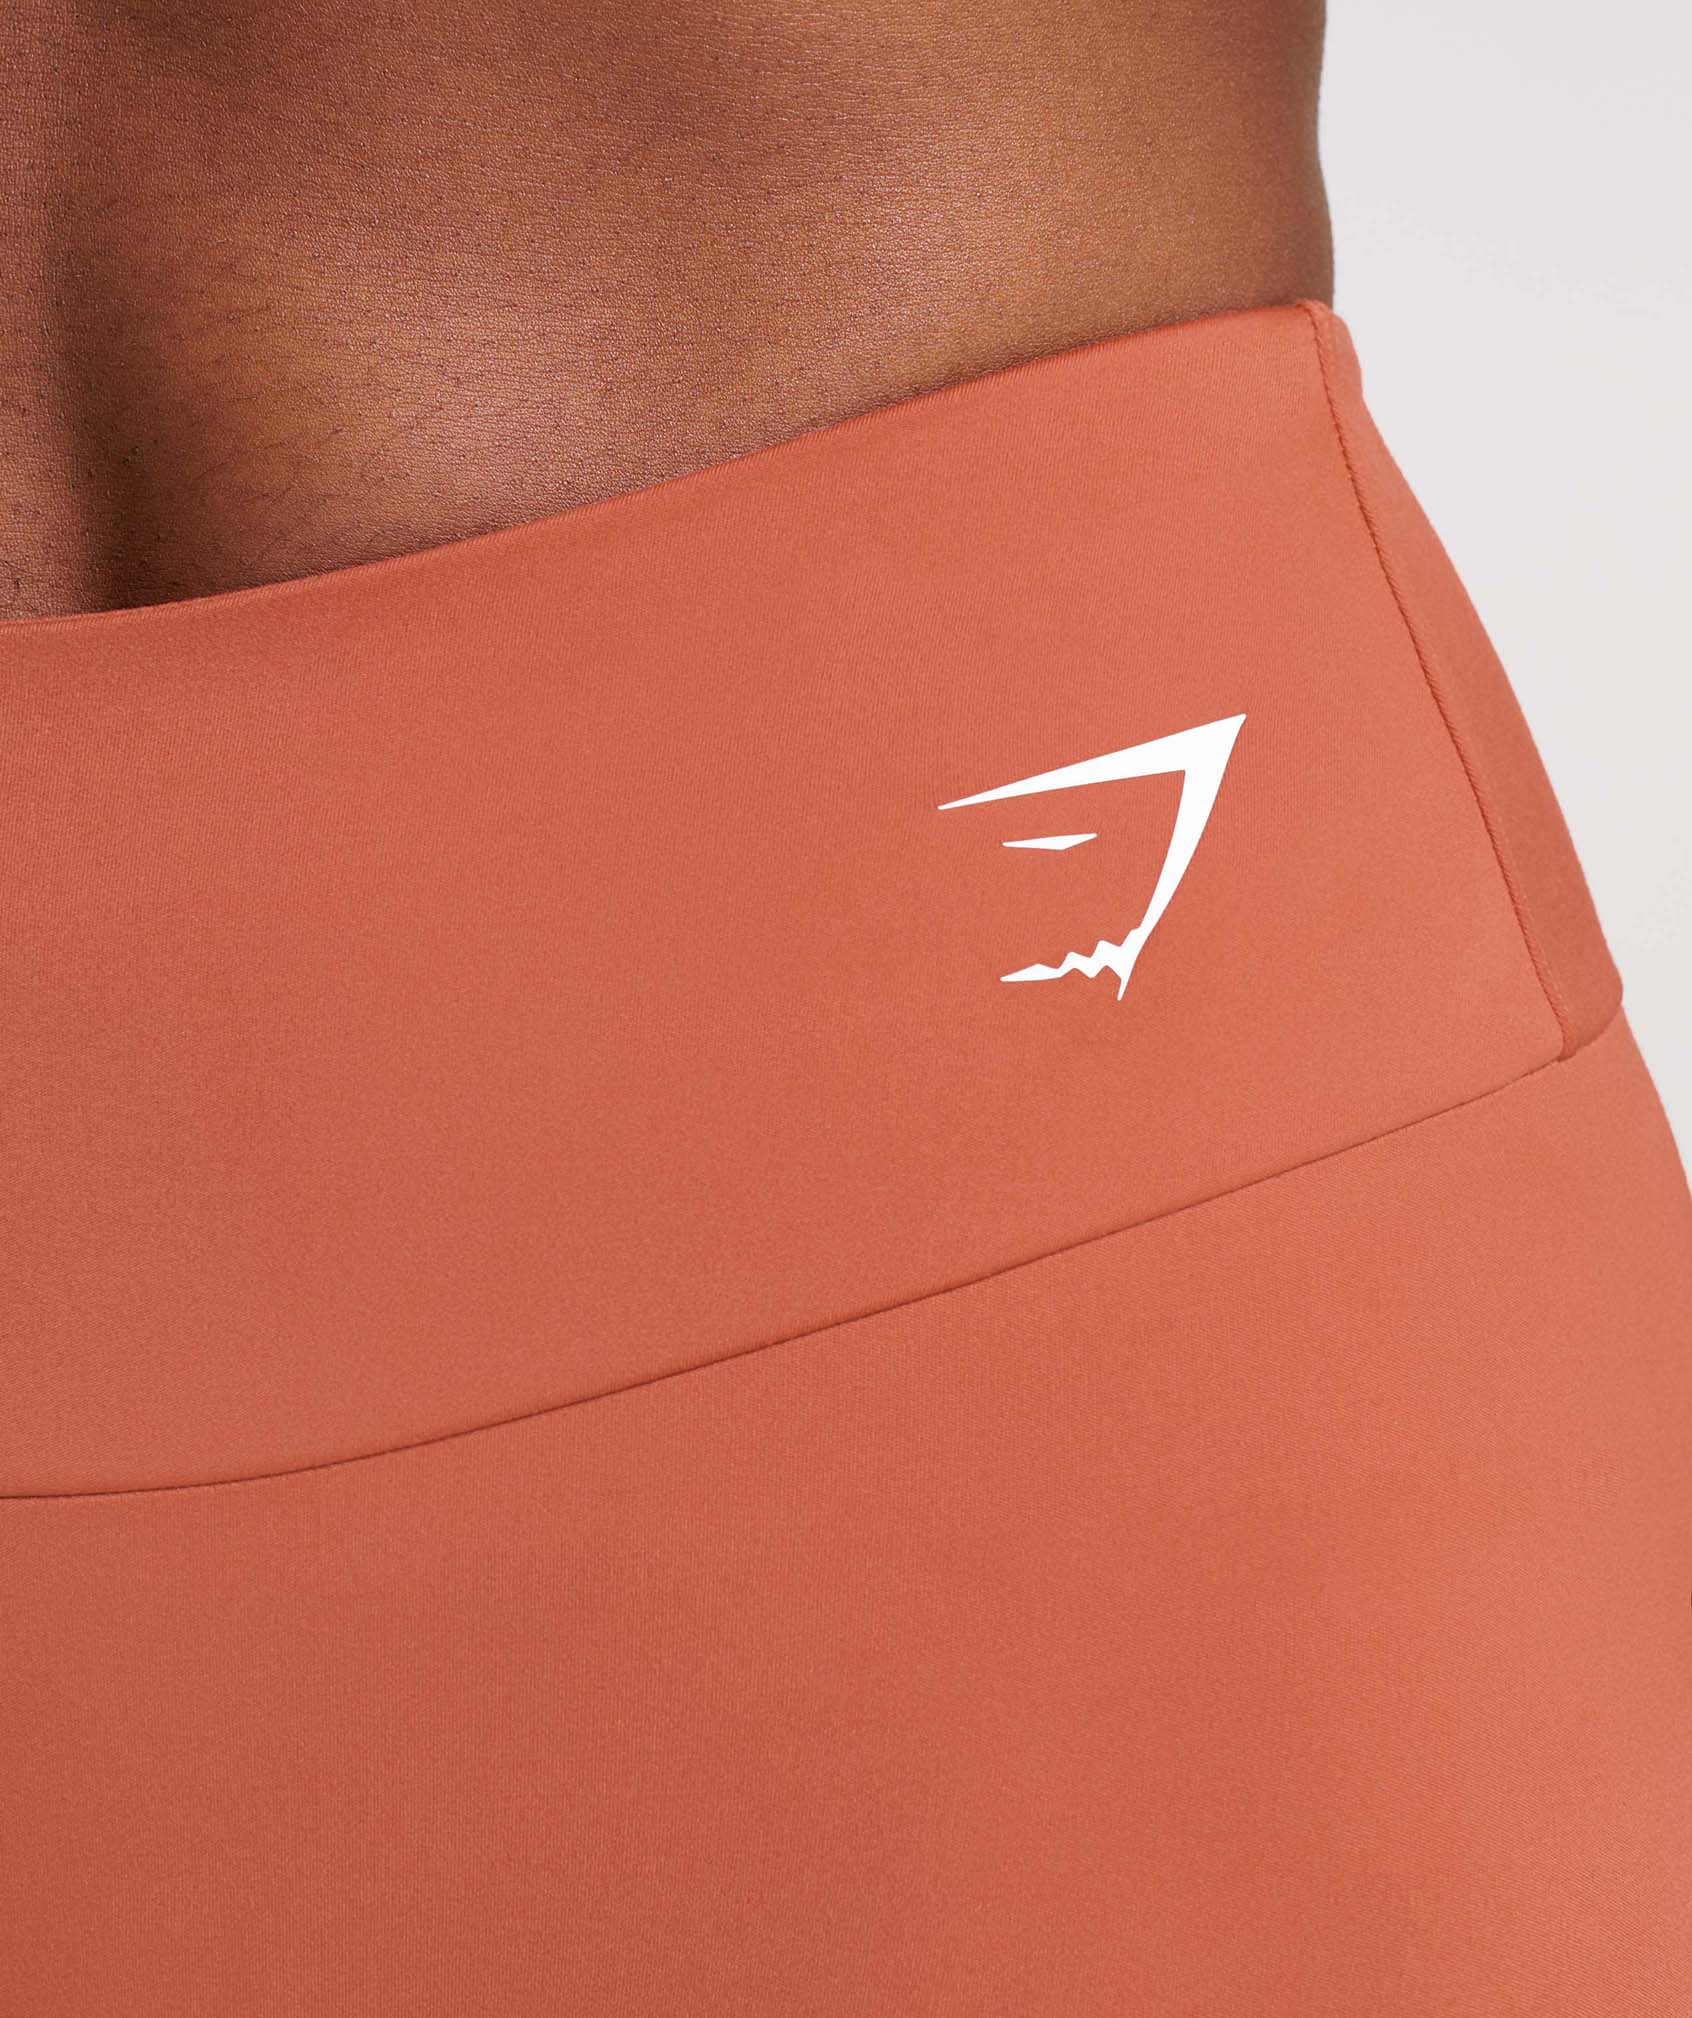 Stylish Persimmon Yoga Pants for a Comfortable Workout